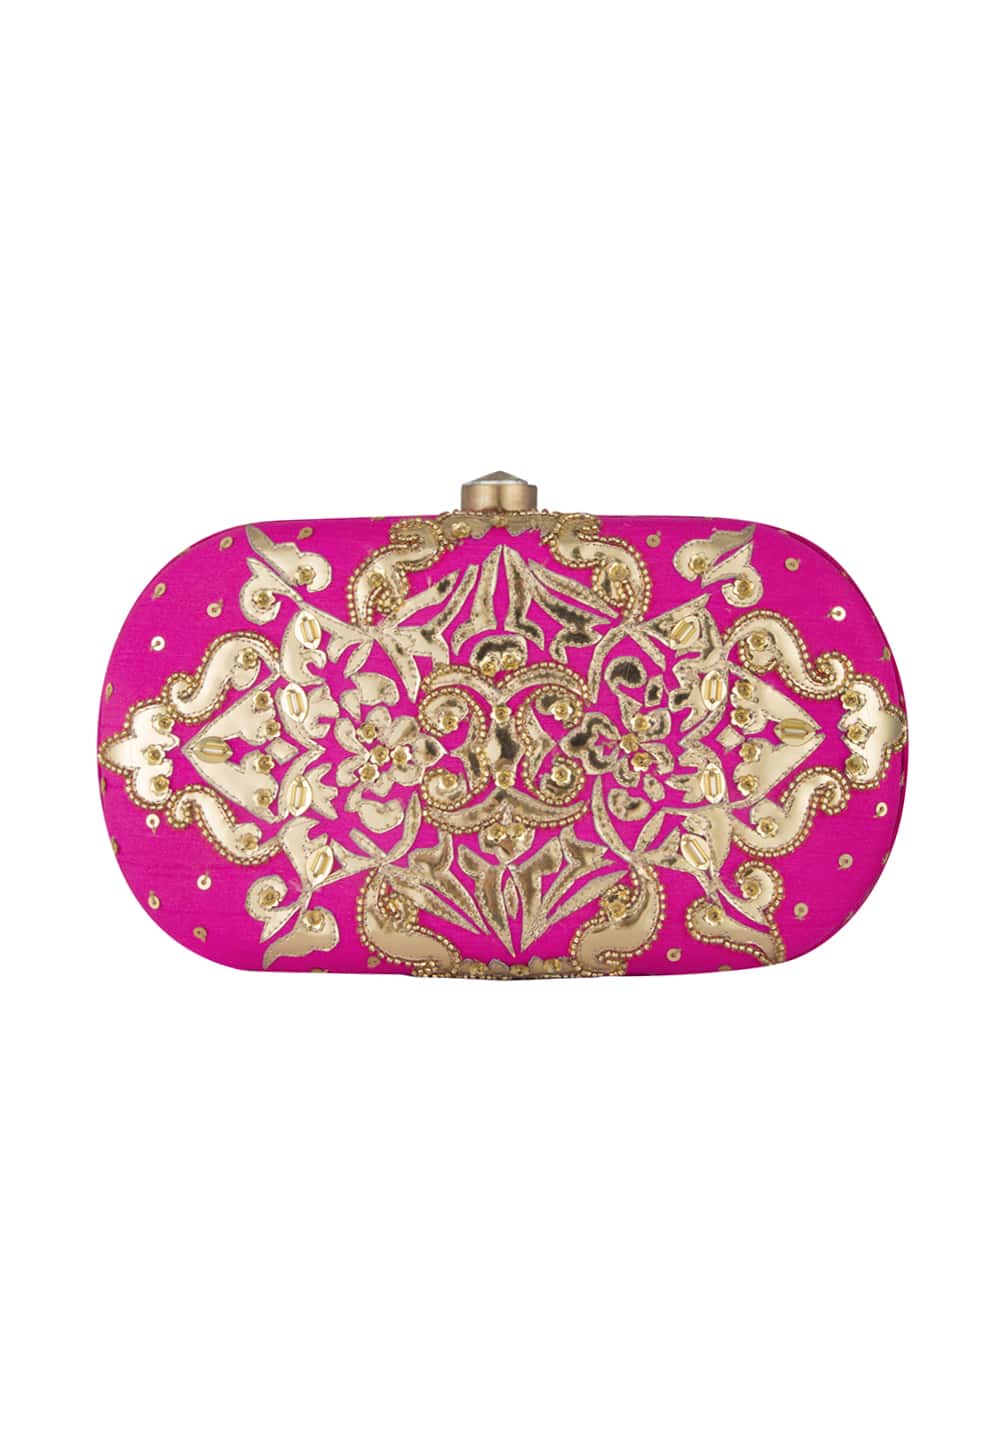 Hot pink and gold applique work oval shaped clutch available only at IBFW.